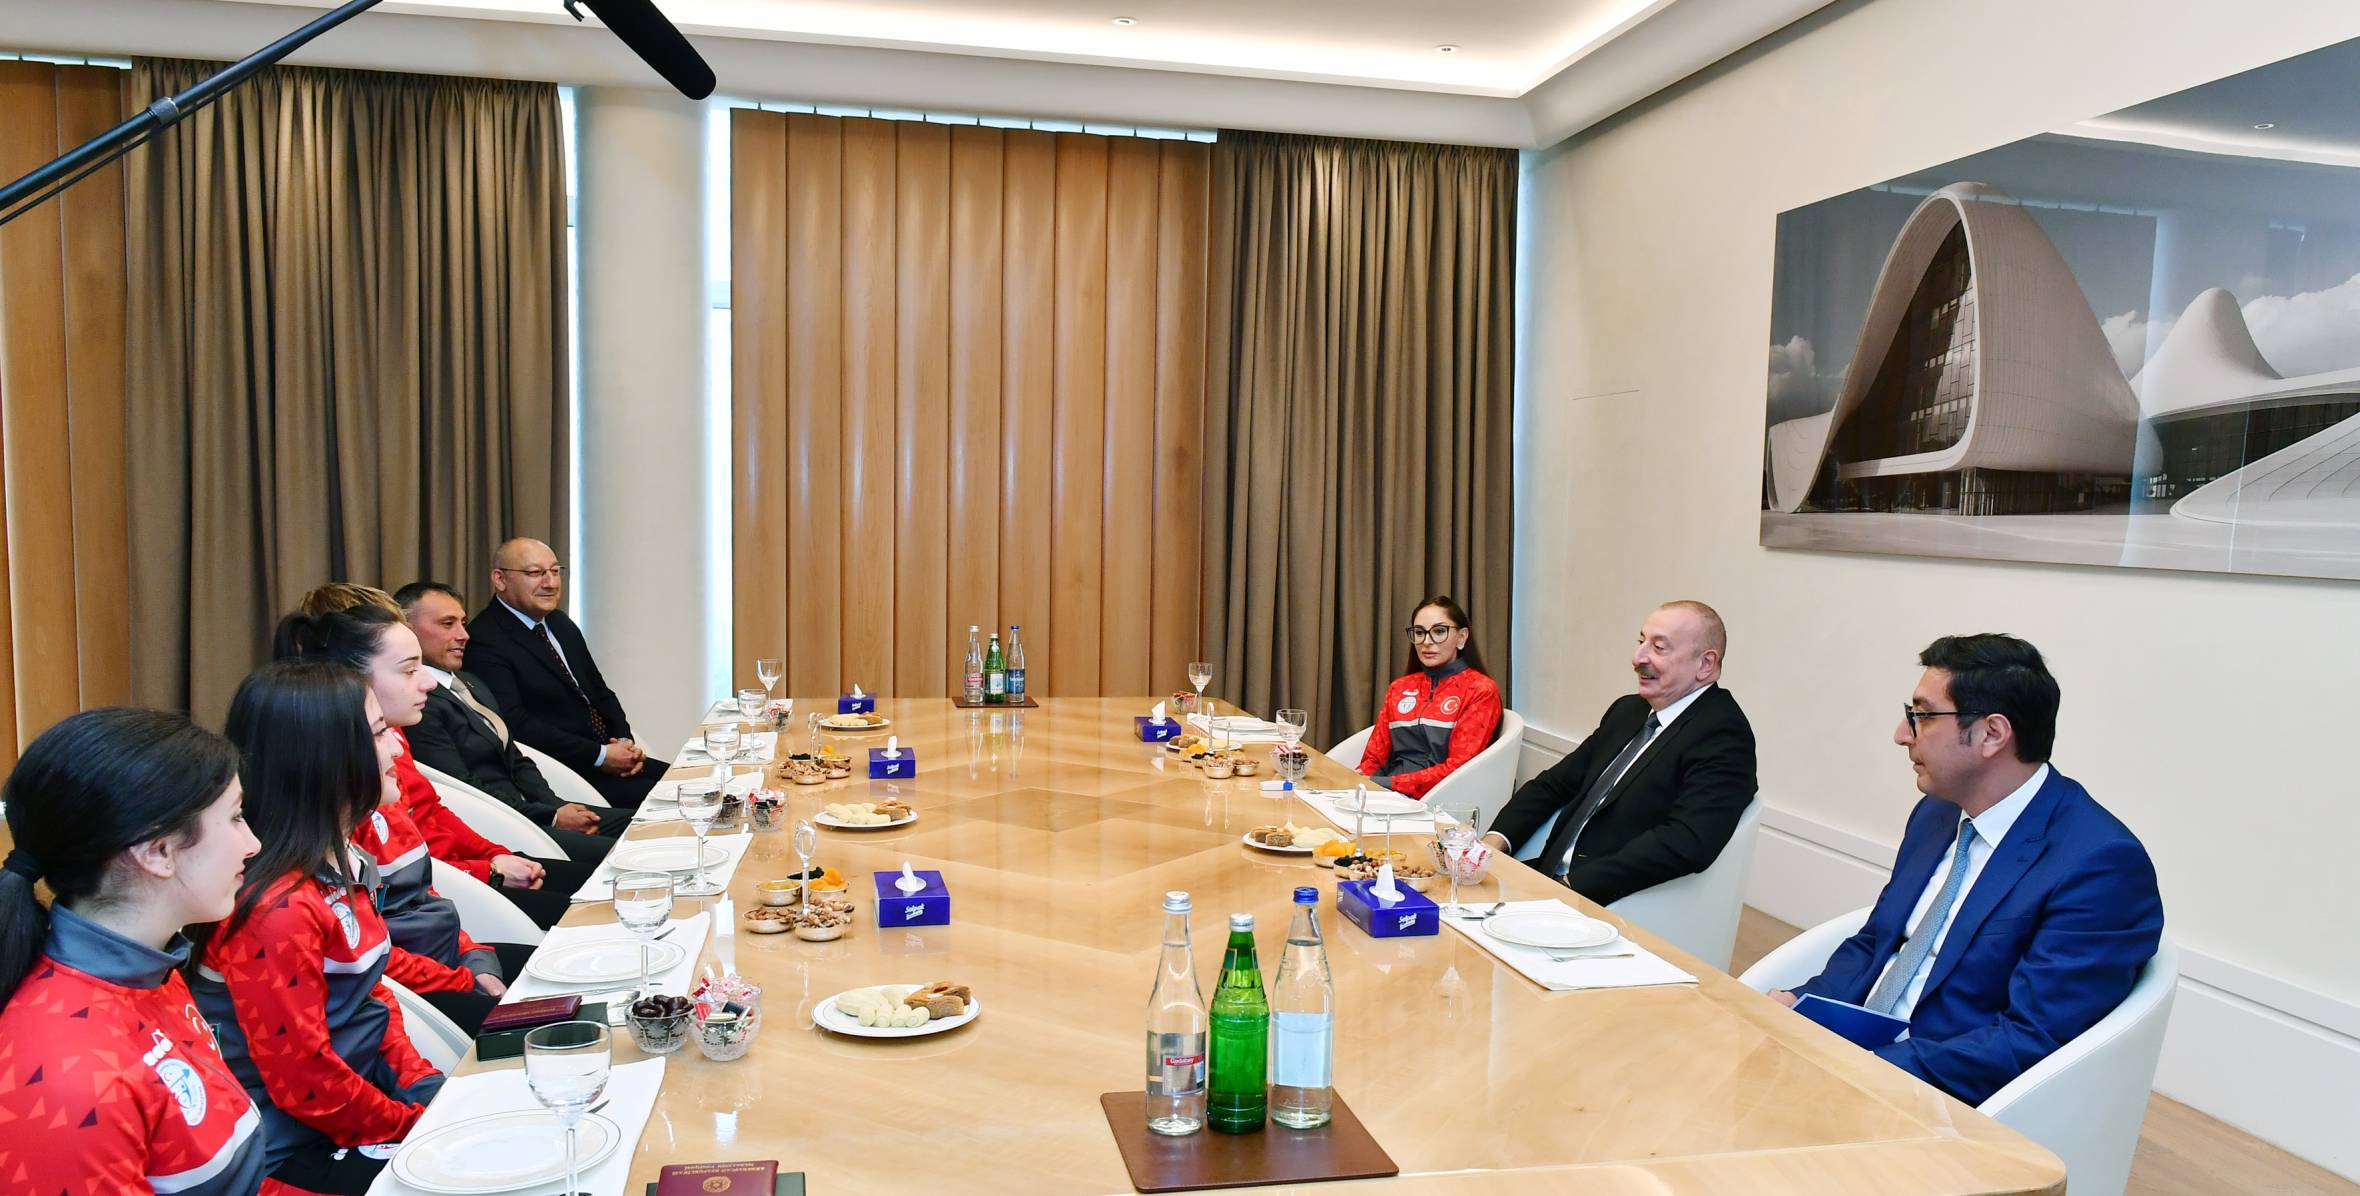 Ilham Aliyev and First Lady Mehriban Aliyeva met with Turkish athletes who dedicated their victories to Azerbaijan at European Weightlifting Championships